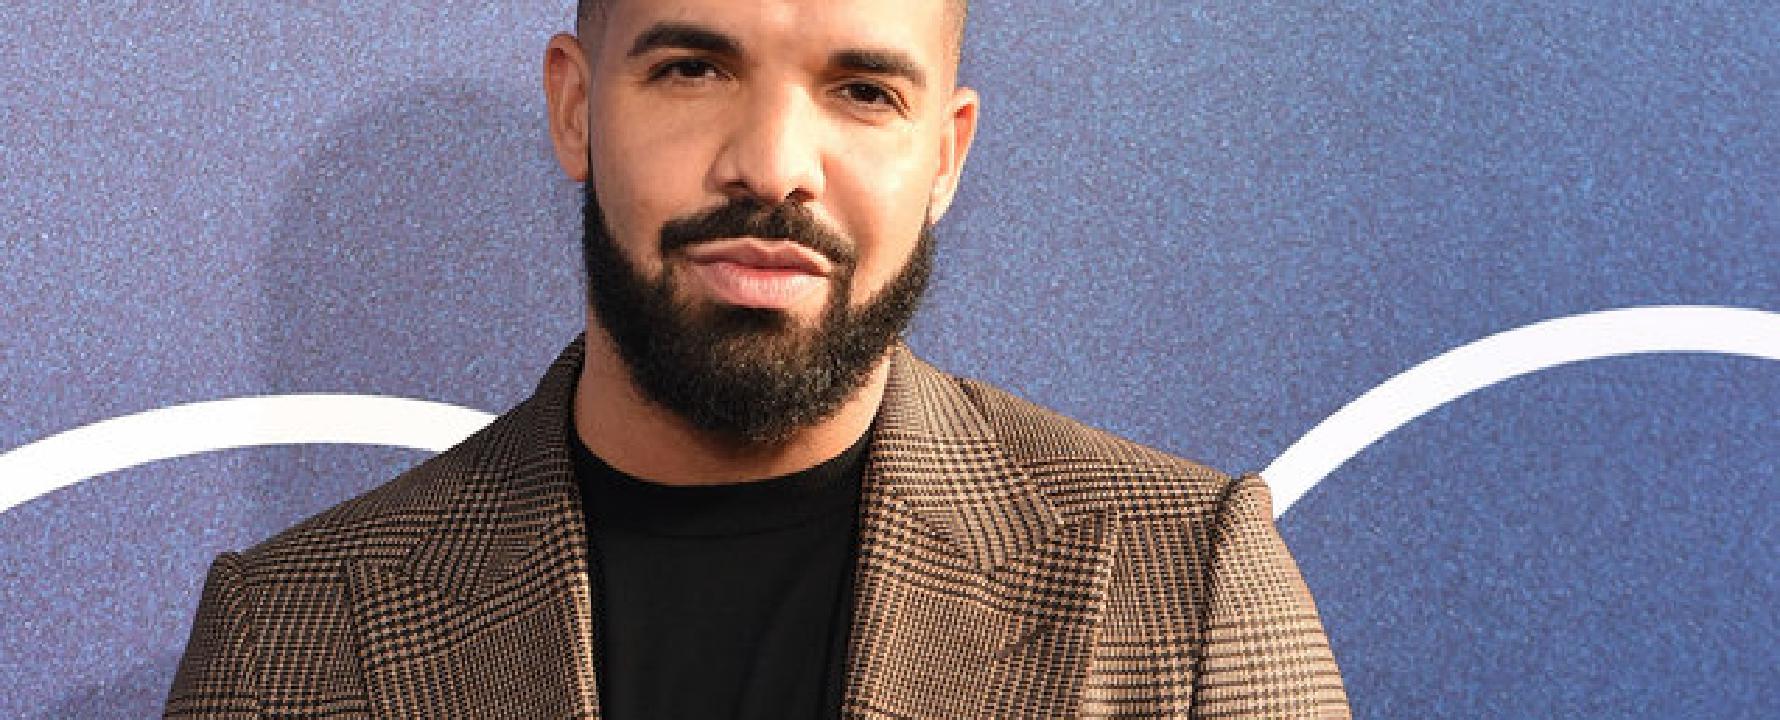 Promotional photograph of Drake.